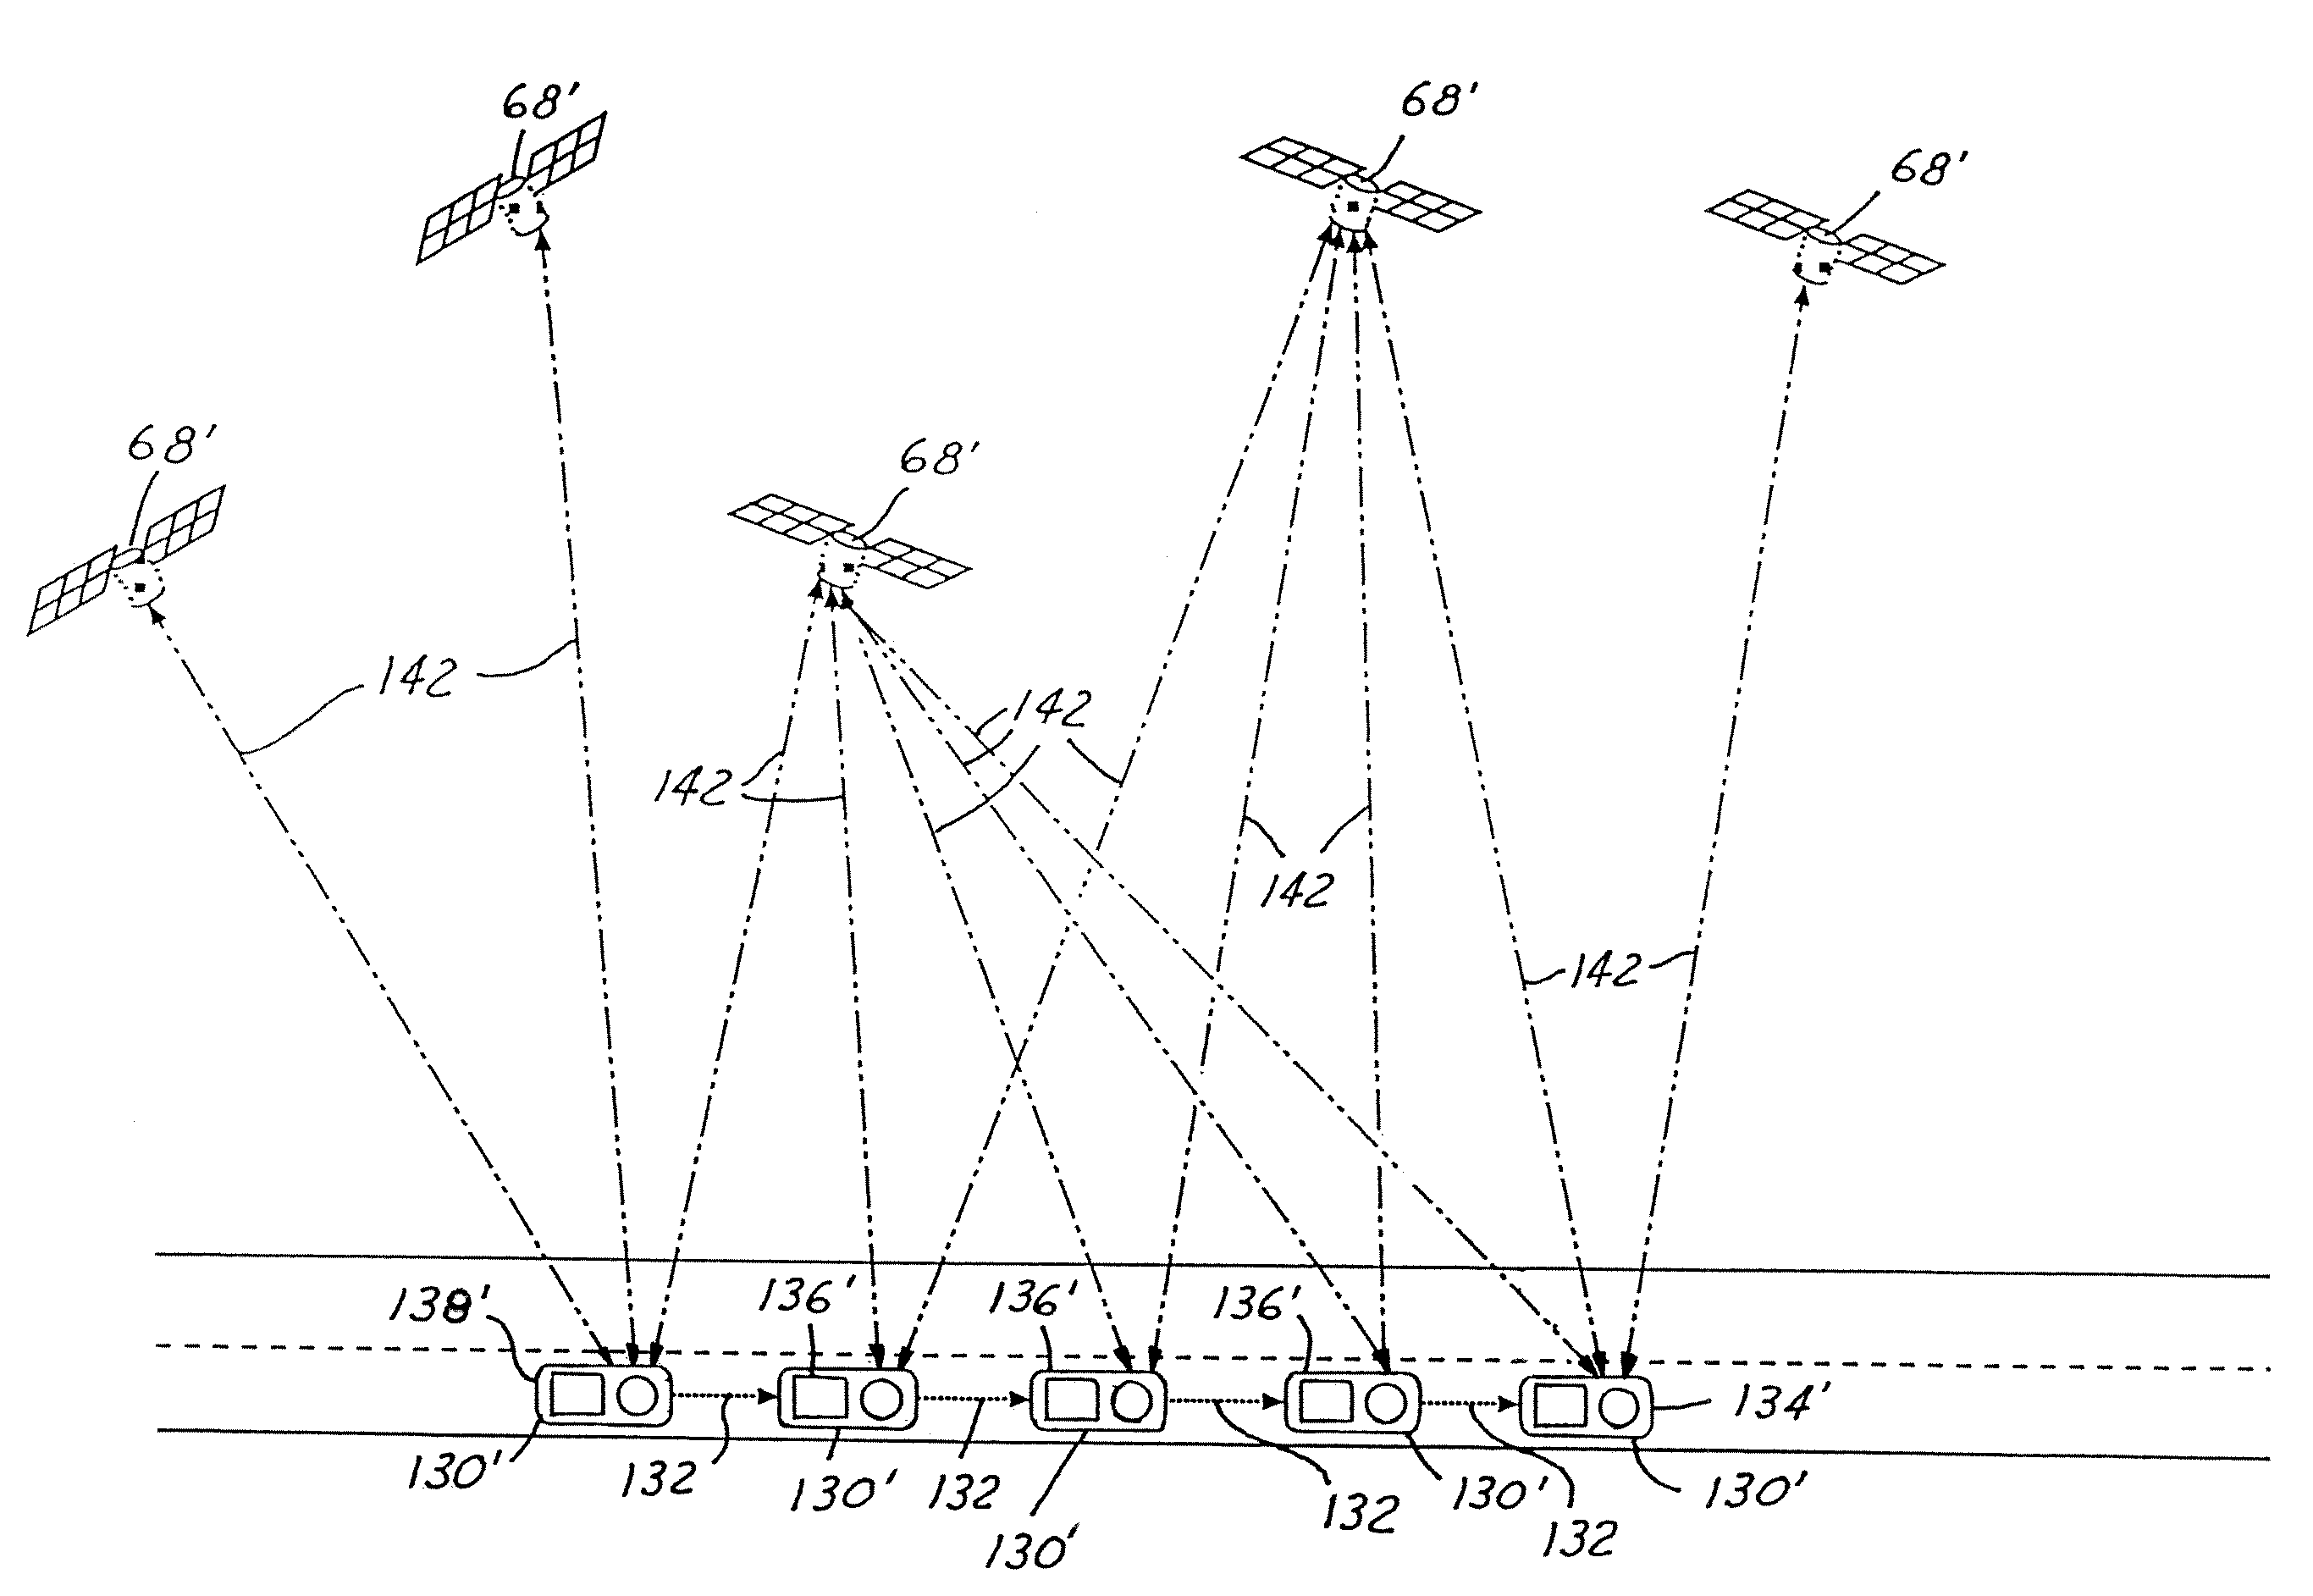 Collision avoidance system having GPS enhanced with OFDM transceivers